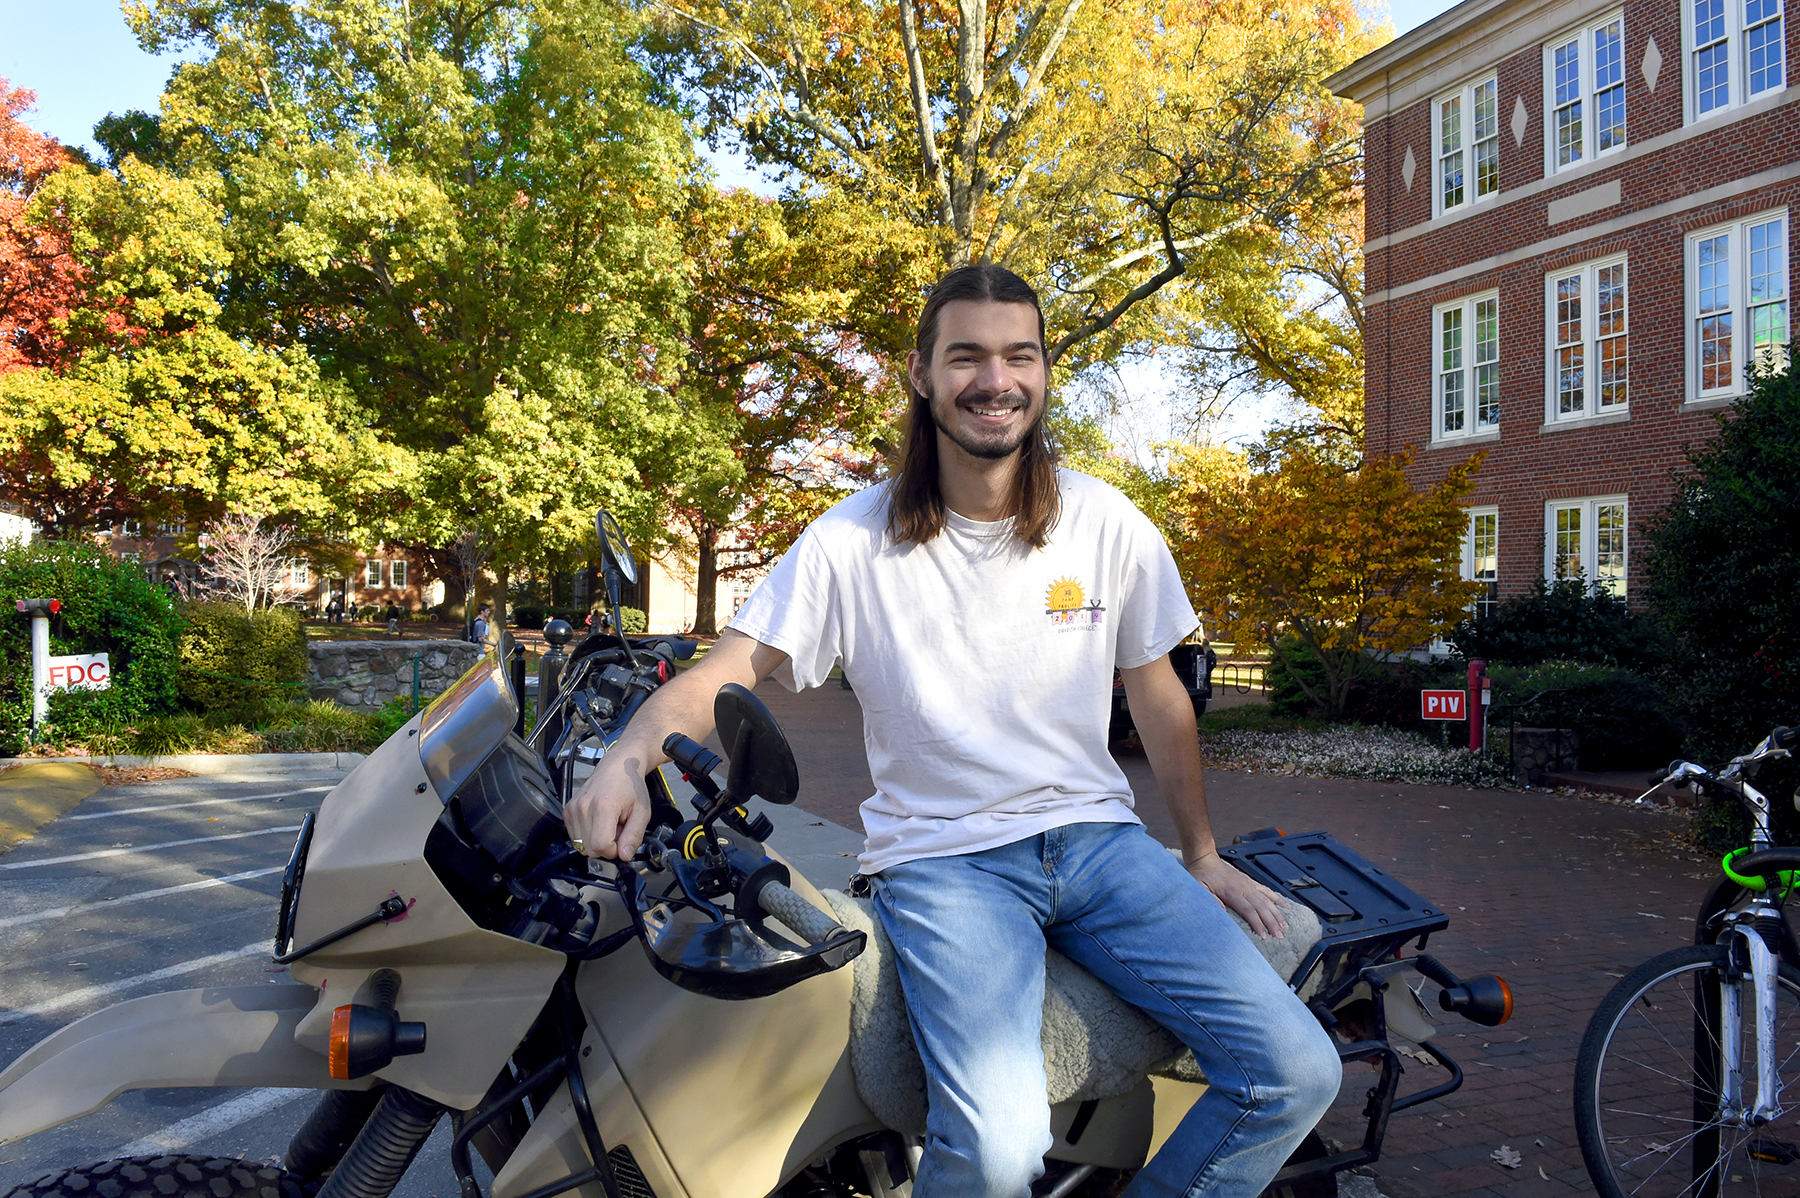 Elliot Carey sits on his motorcycle on campus.